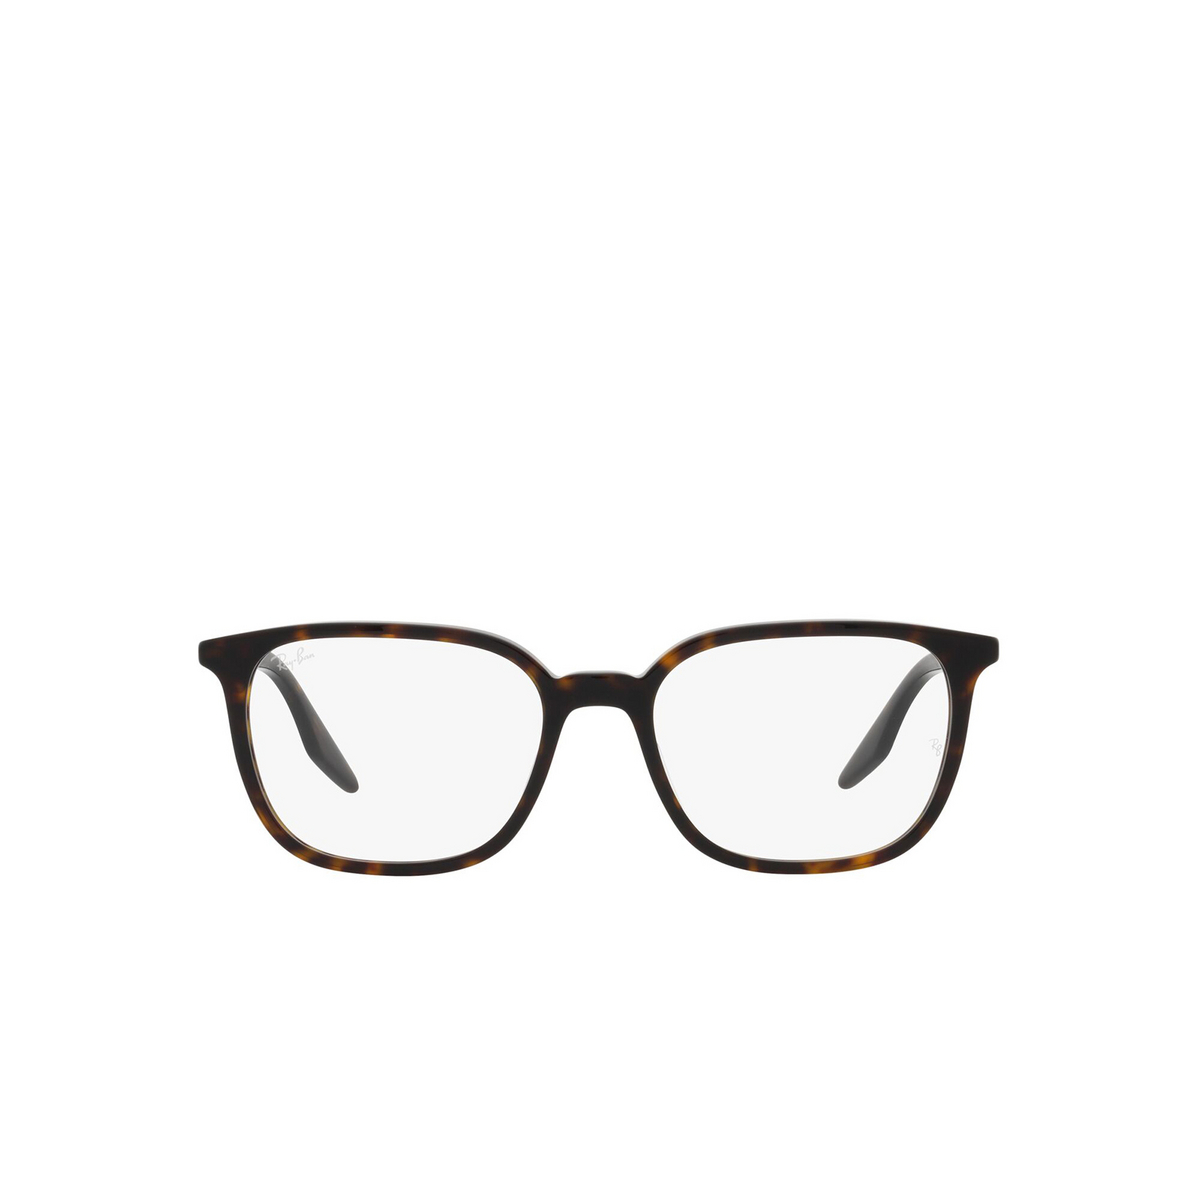 Ray-Ban® Square Eyeglasses: RX5406 color Havana 2012 - front view.